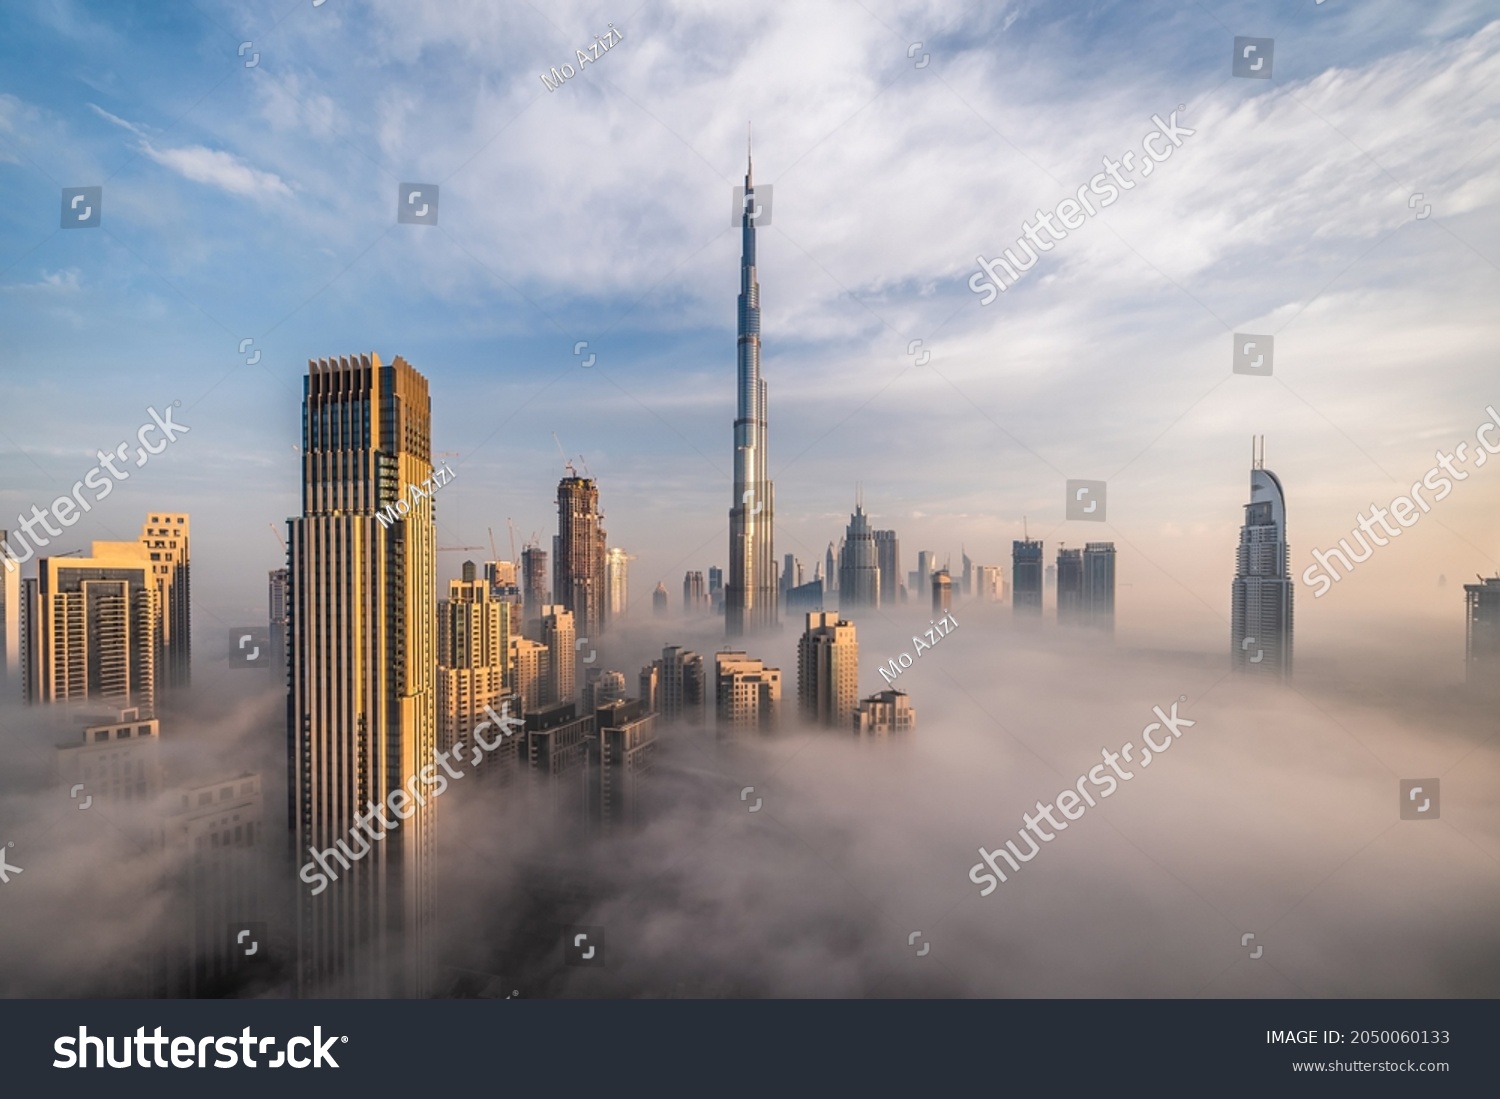 Downtown Dubai with skyscrapers submerged in think fog. Picture taken from unique view. Tall buildings. Early morning glow.  #2050060133